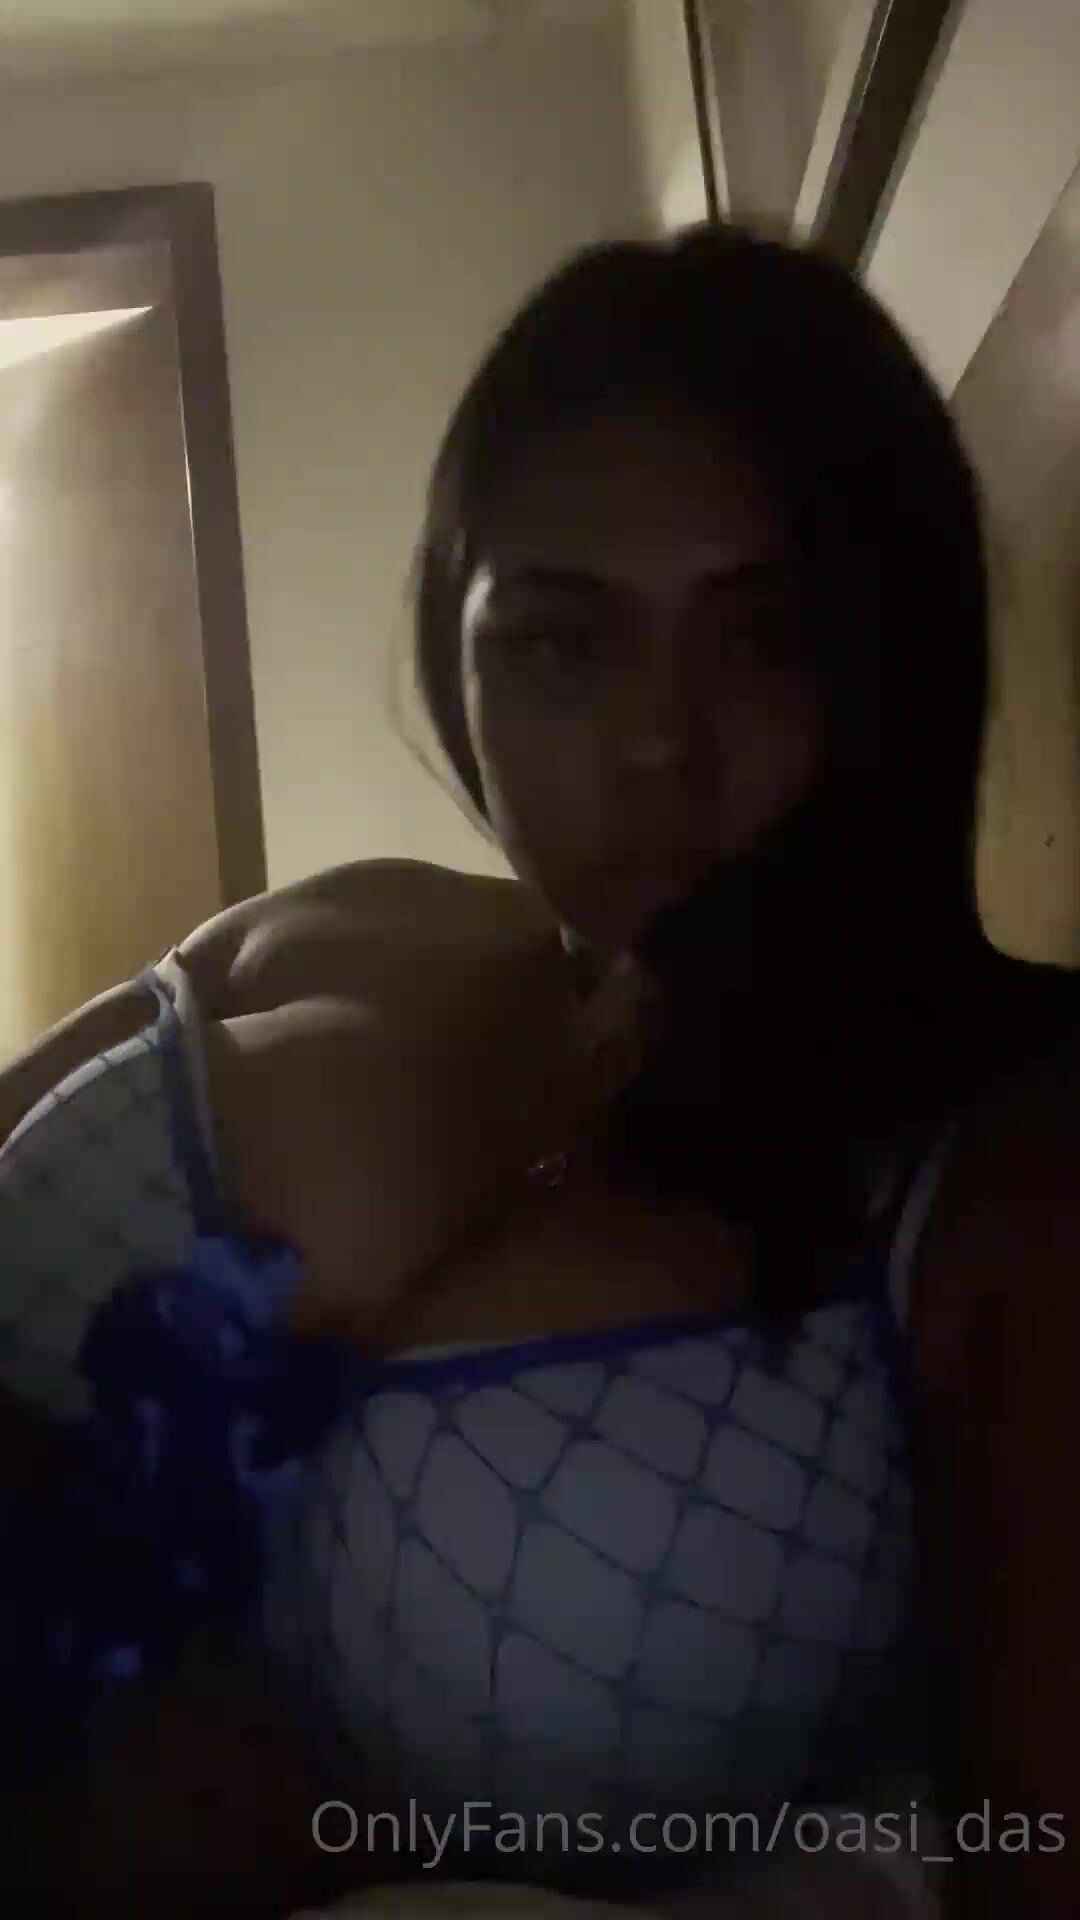 Xxx Video C Com - Oasi das 13 01 2021 2007876129 do you like this outfit c onlyfans xxx porn  videos